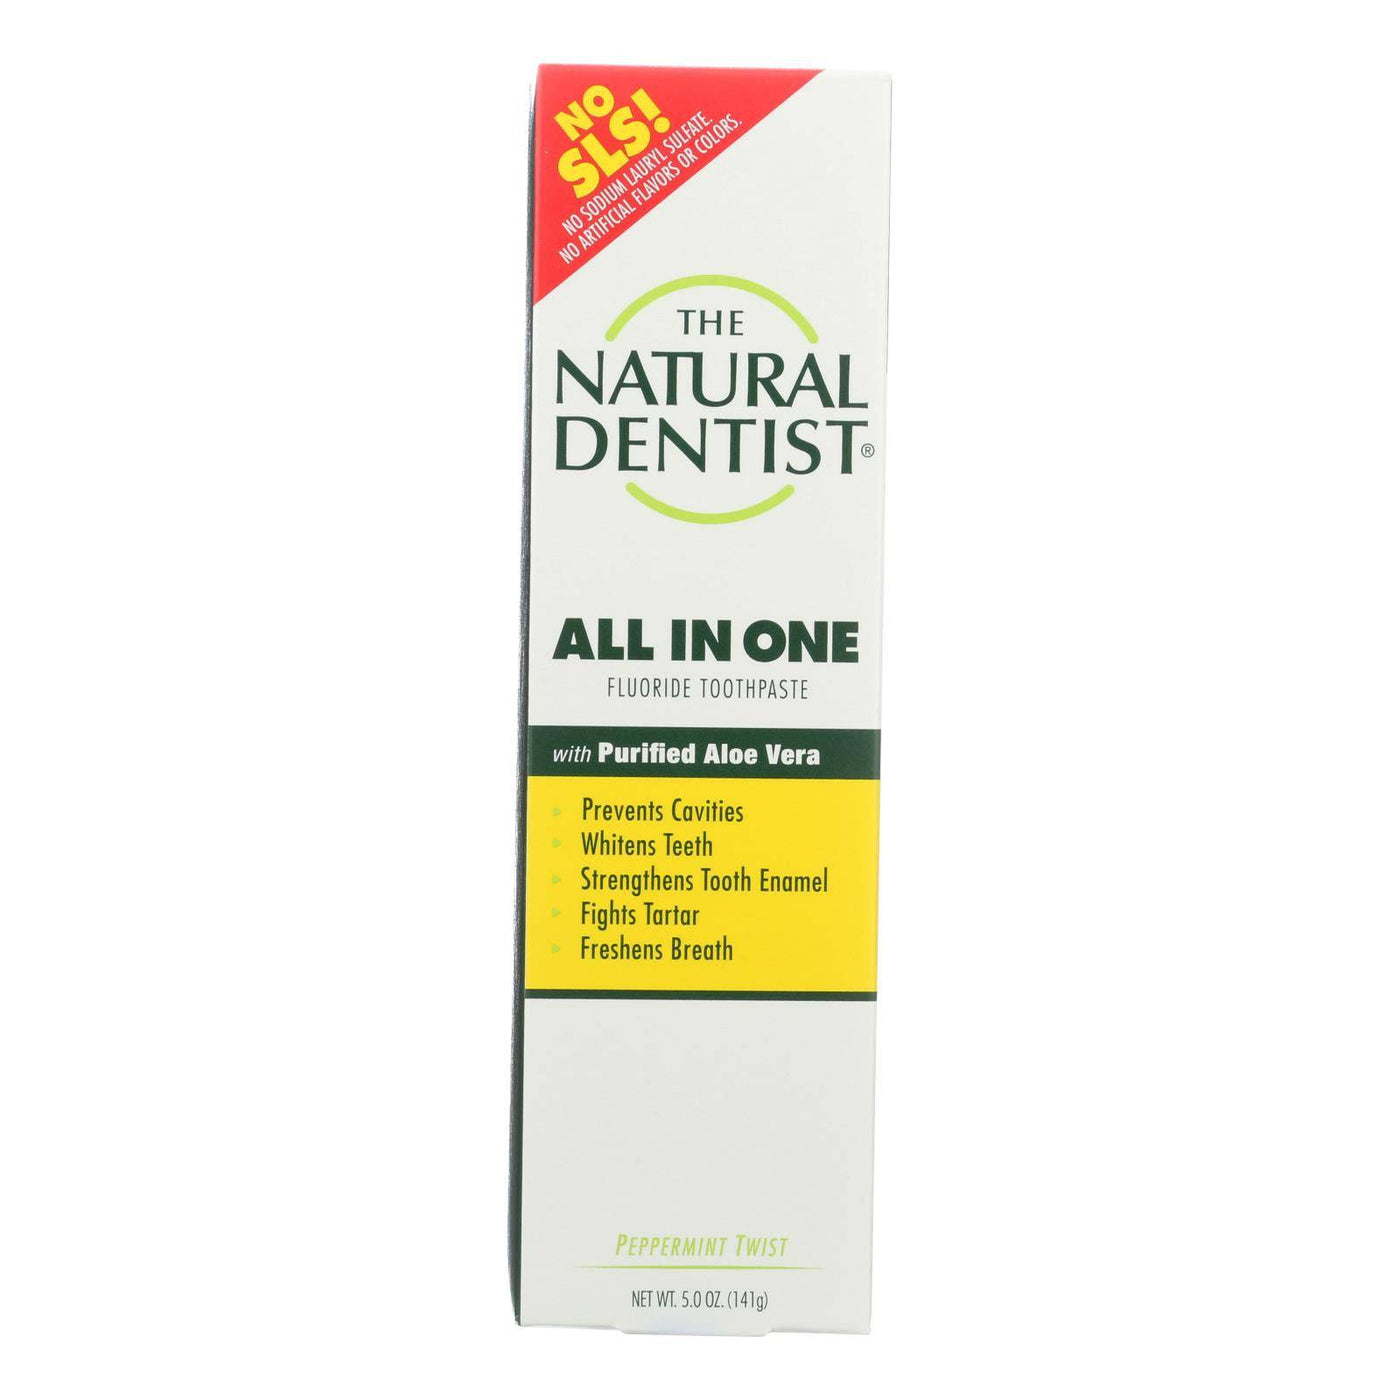 Buy Natural Dentist Anti-cavity Toothpaste Original Peppermint Twist - 5 Oz  at OnlyNaturals.us